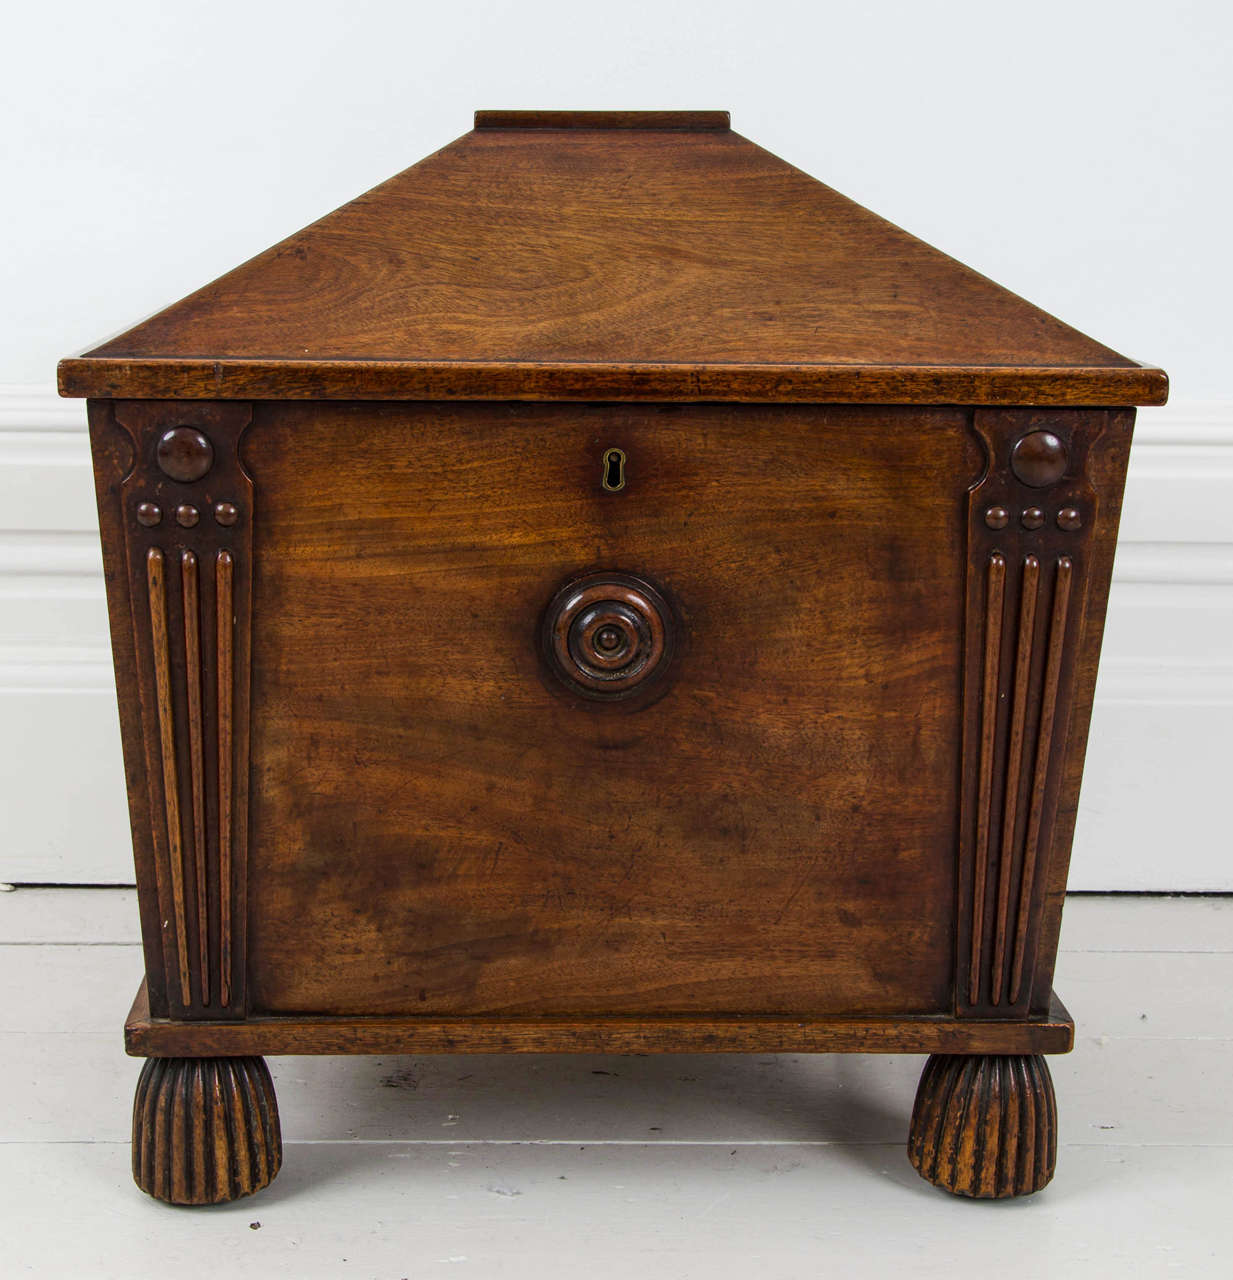 In the manner of Charles Heathcote Tatham. The pitched hinged lid enclosing divisions for bottles, the front with a central moulded roundel and flanked by tapered uprights with roundel decoration, on reeded domed feet with concealed castors.